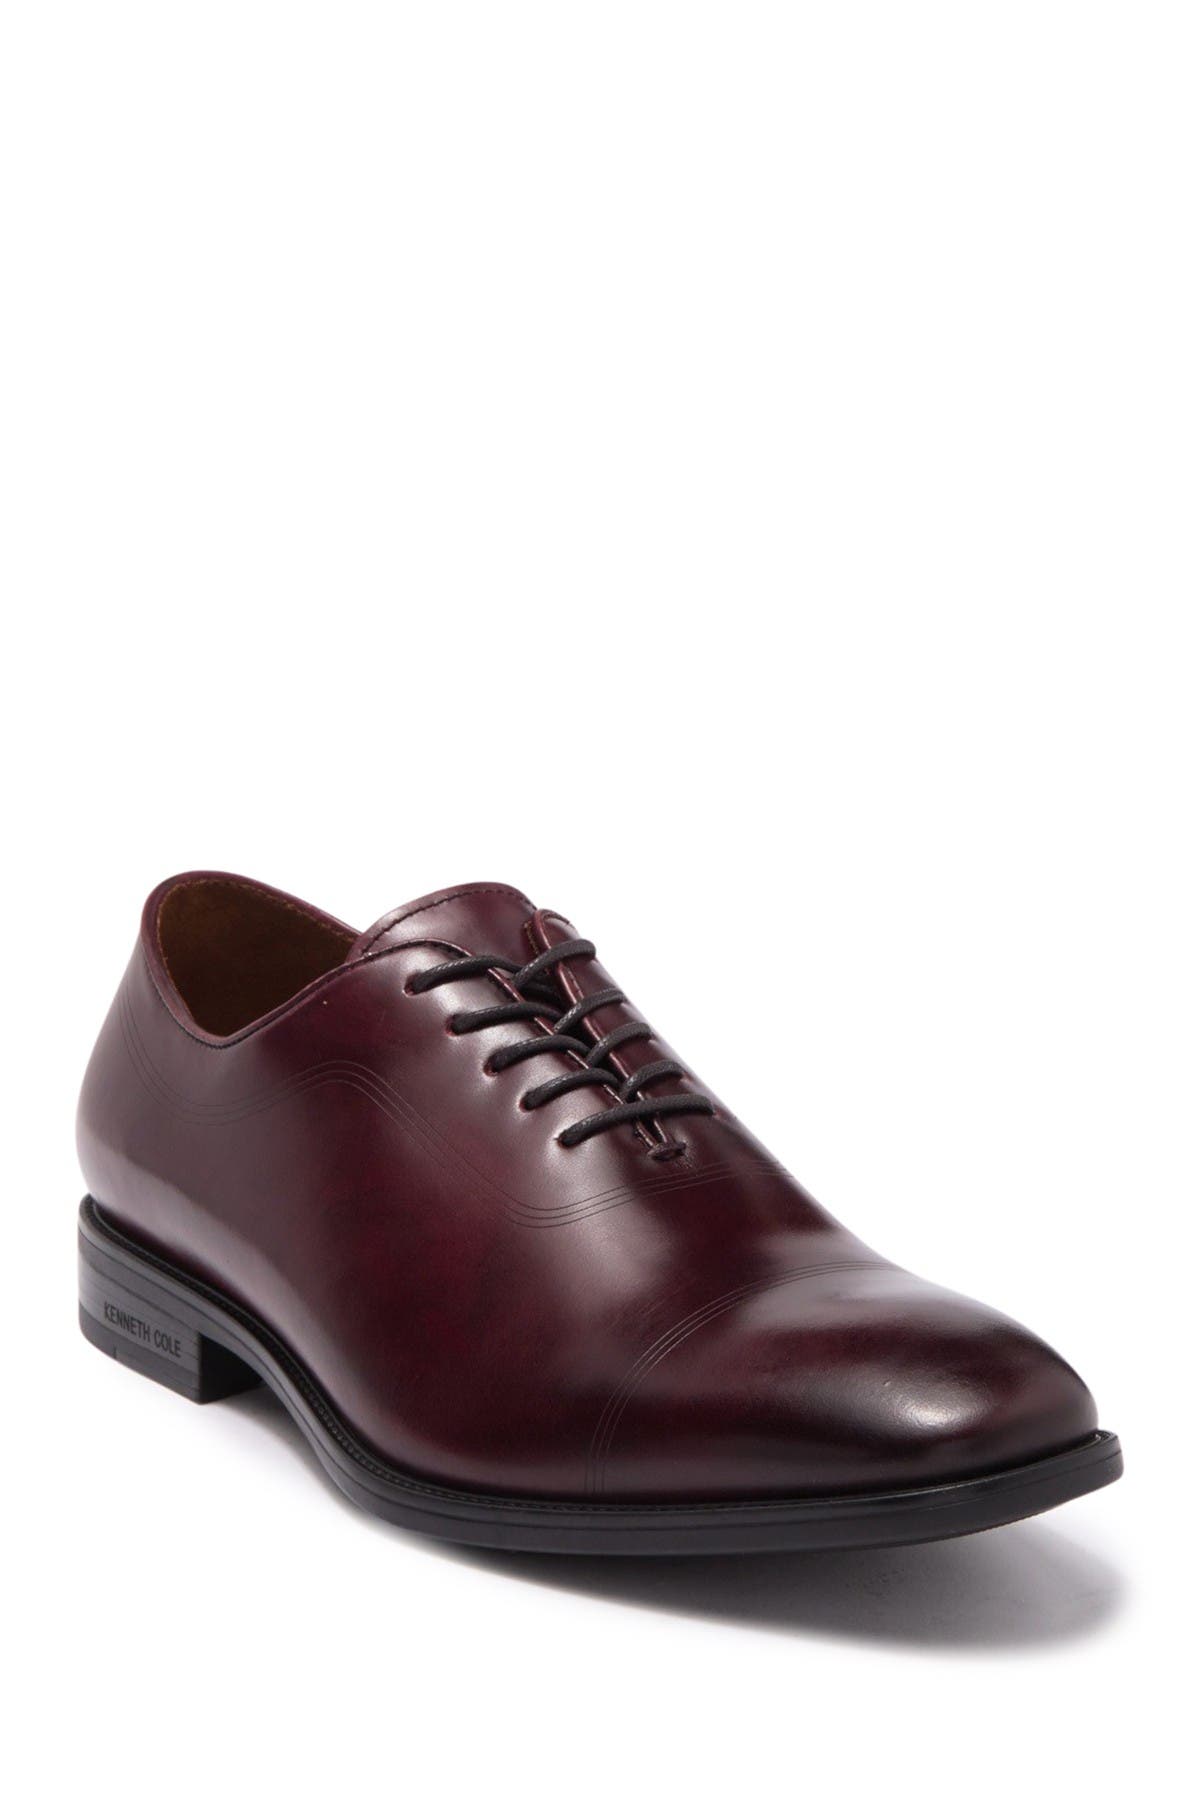 kenneth cole oxfords